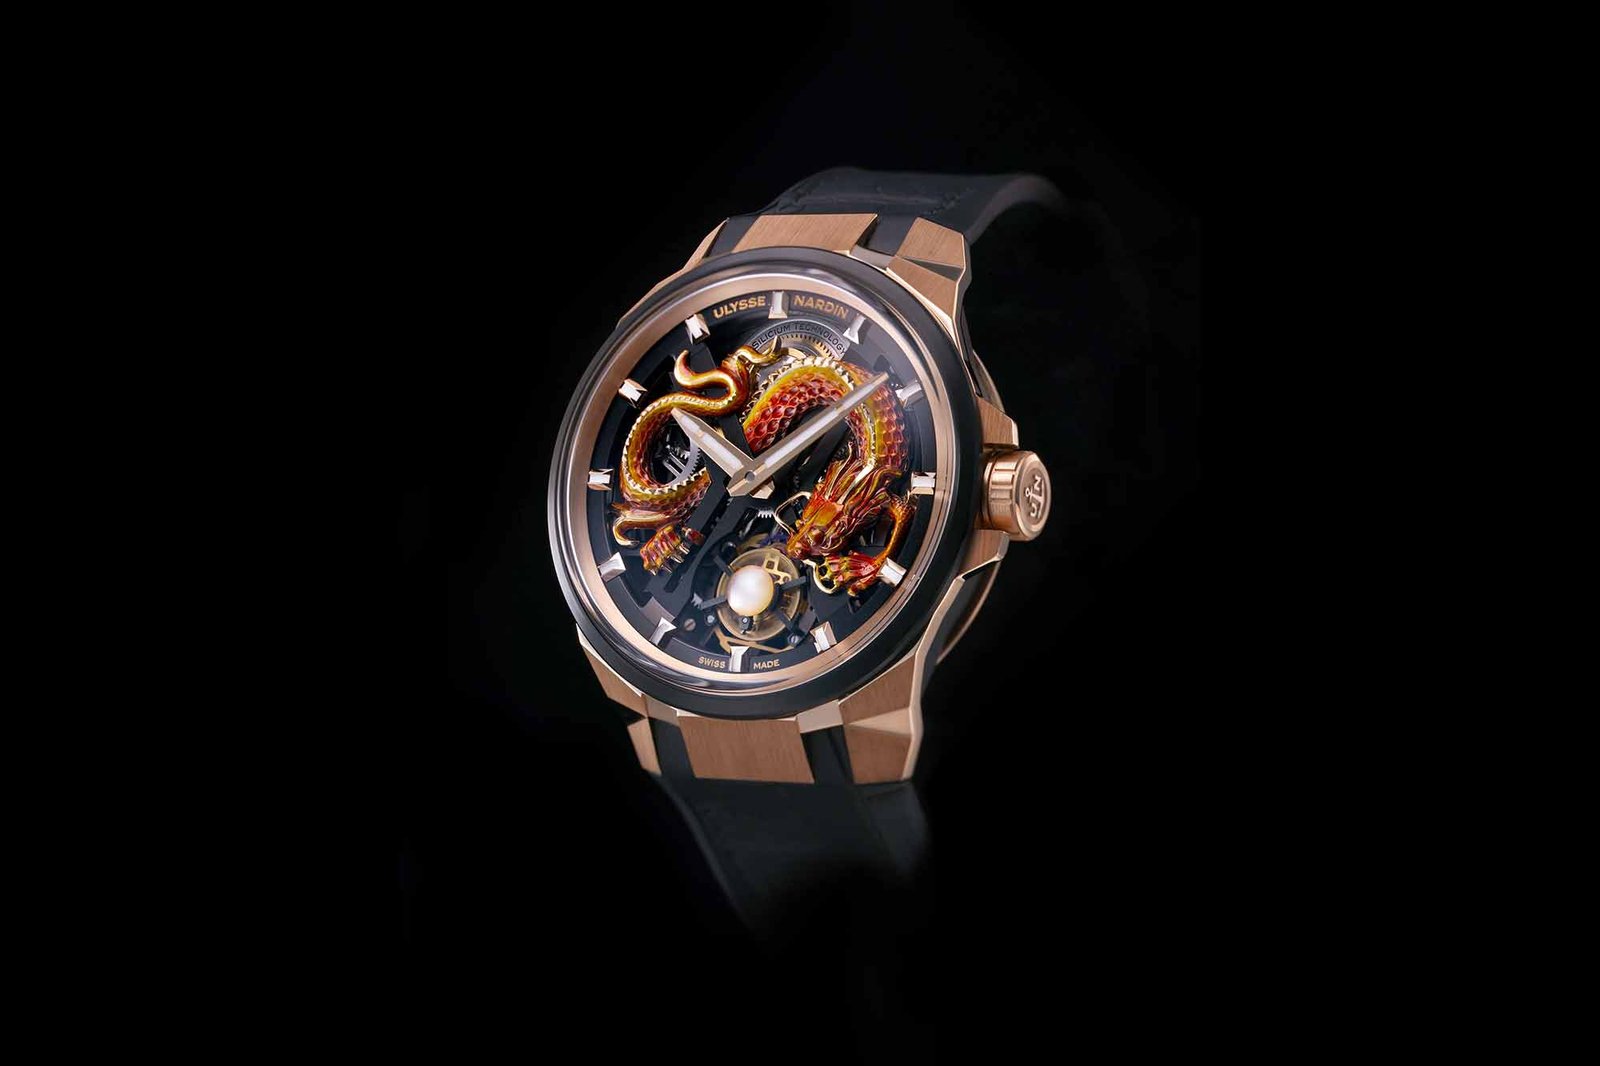 Three New Watches Celebrate the Year of the Wood Dragon